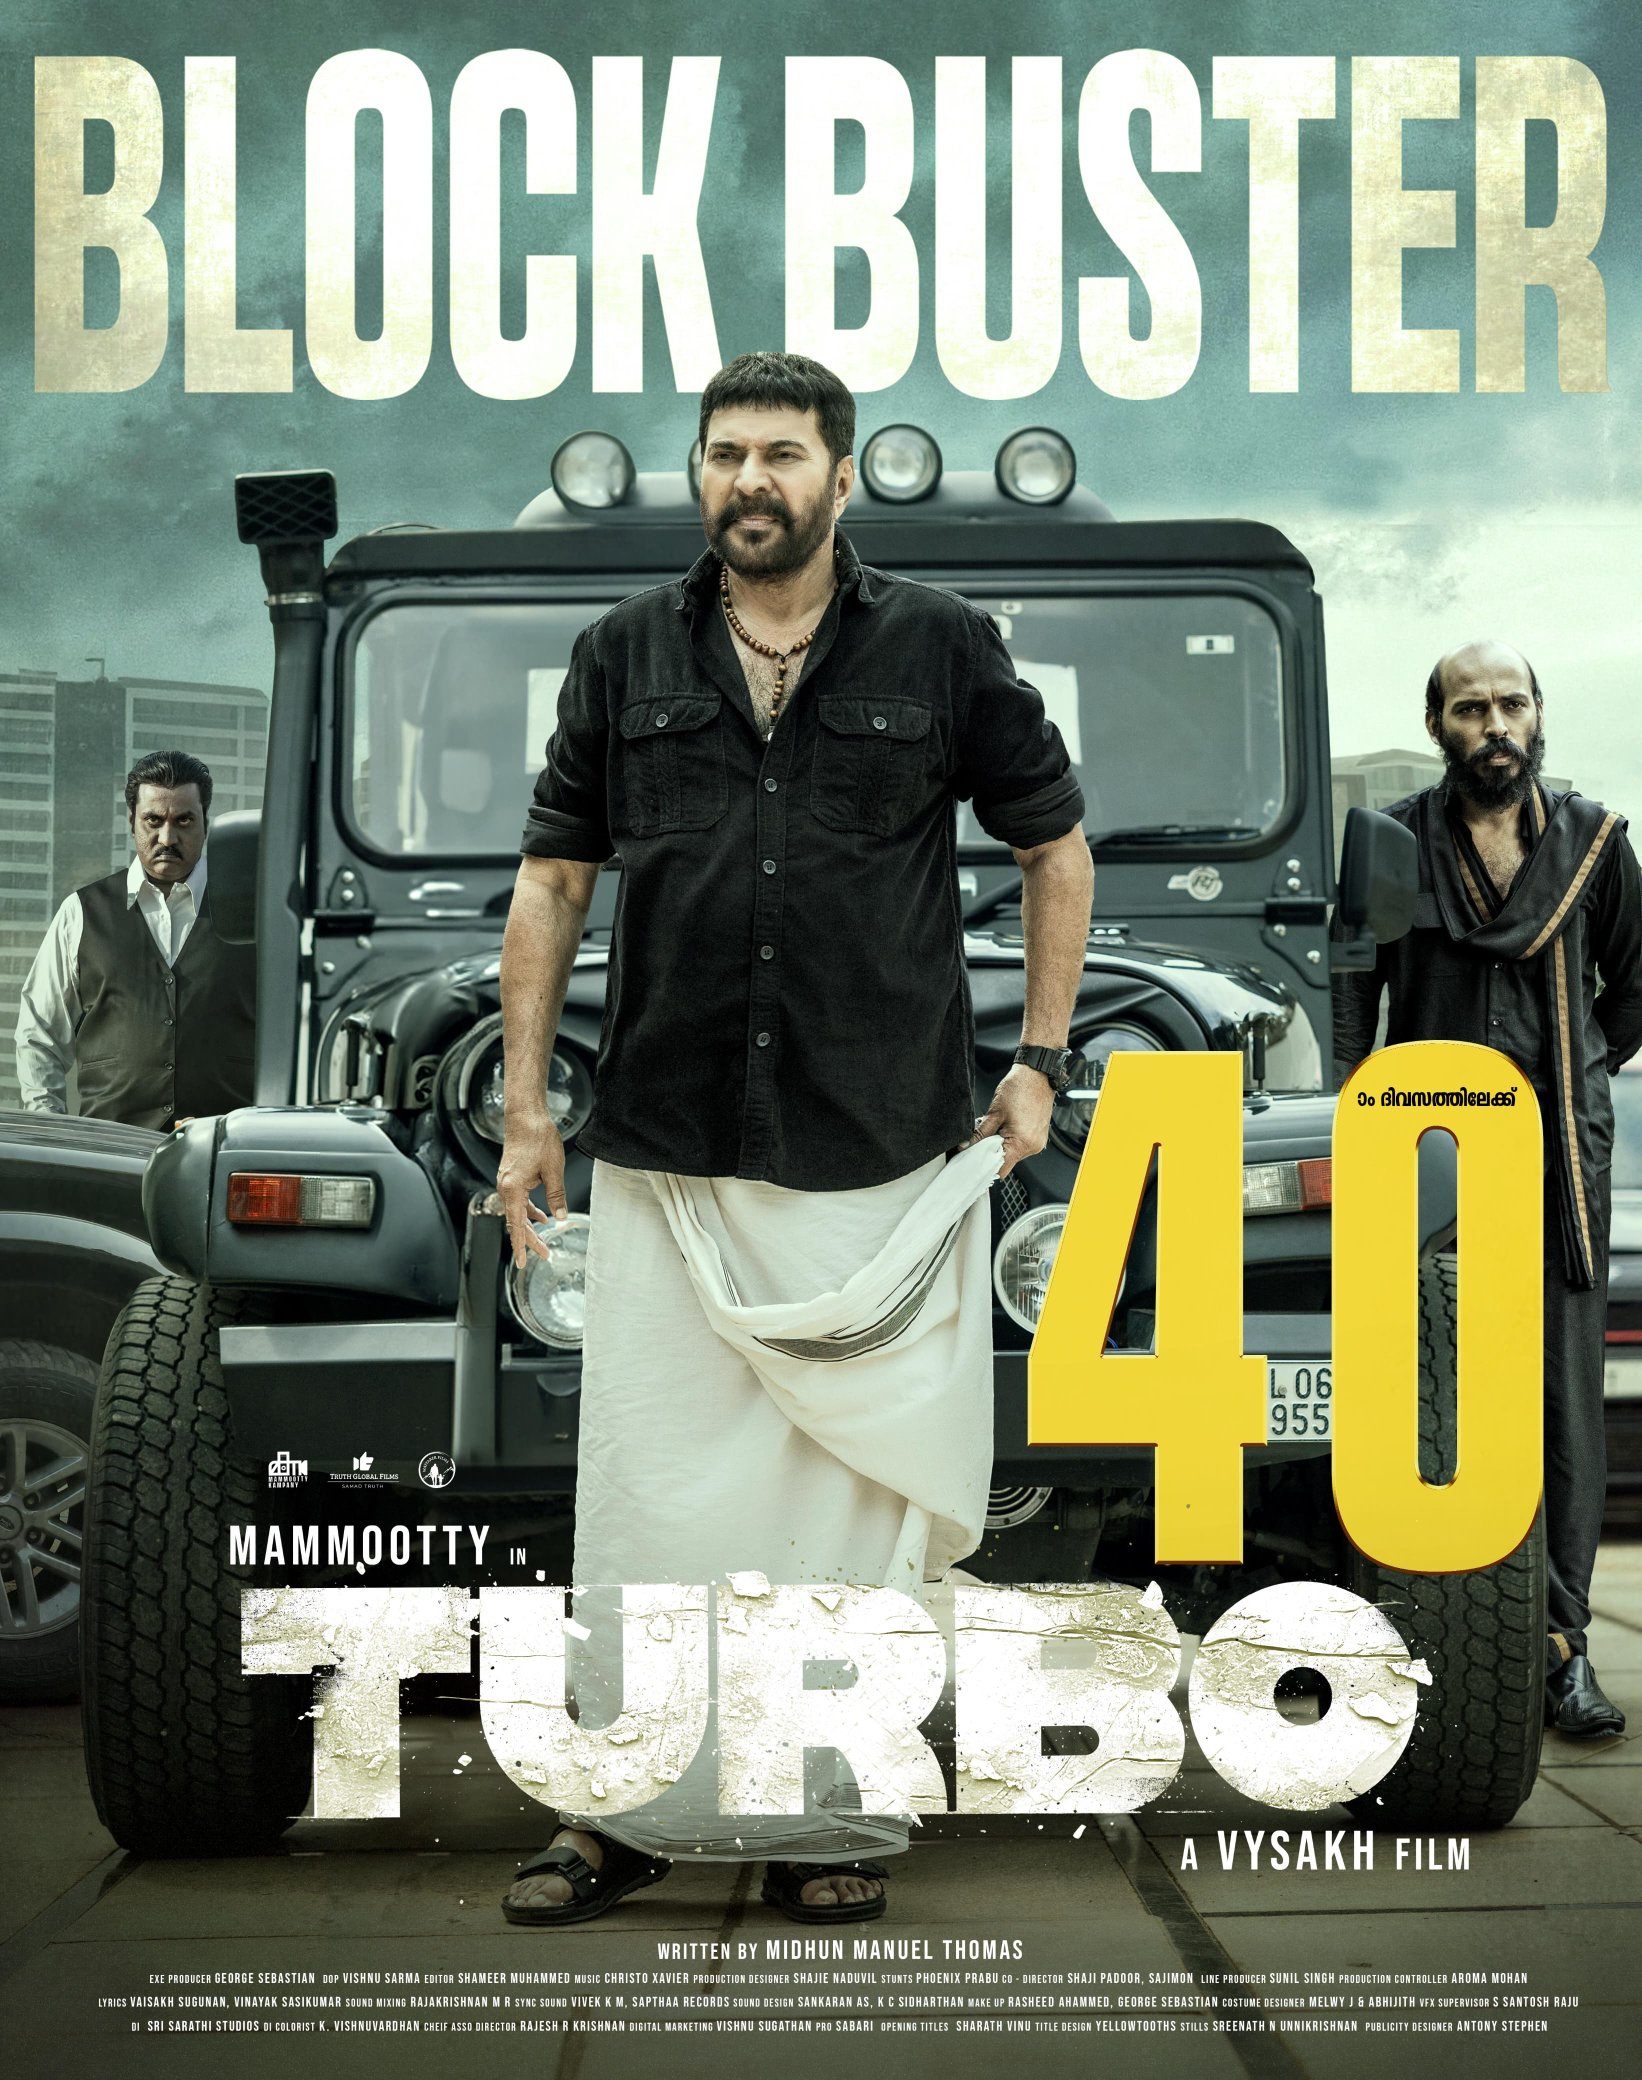 Turbo Movie Final Worldwide Collections, Mammootty Movie Final Worldwide Collections, Mammootty Latest Movie Collections, Mammootty Movie Update, Mammootty